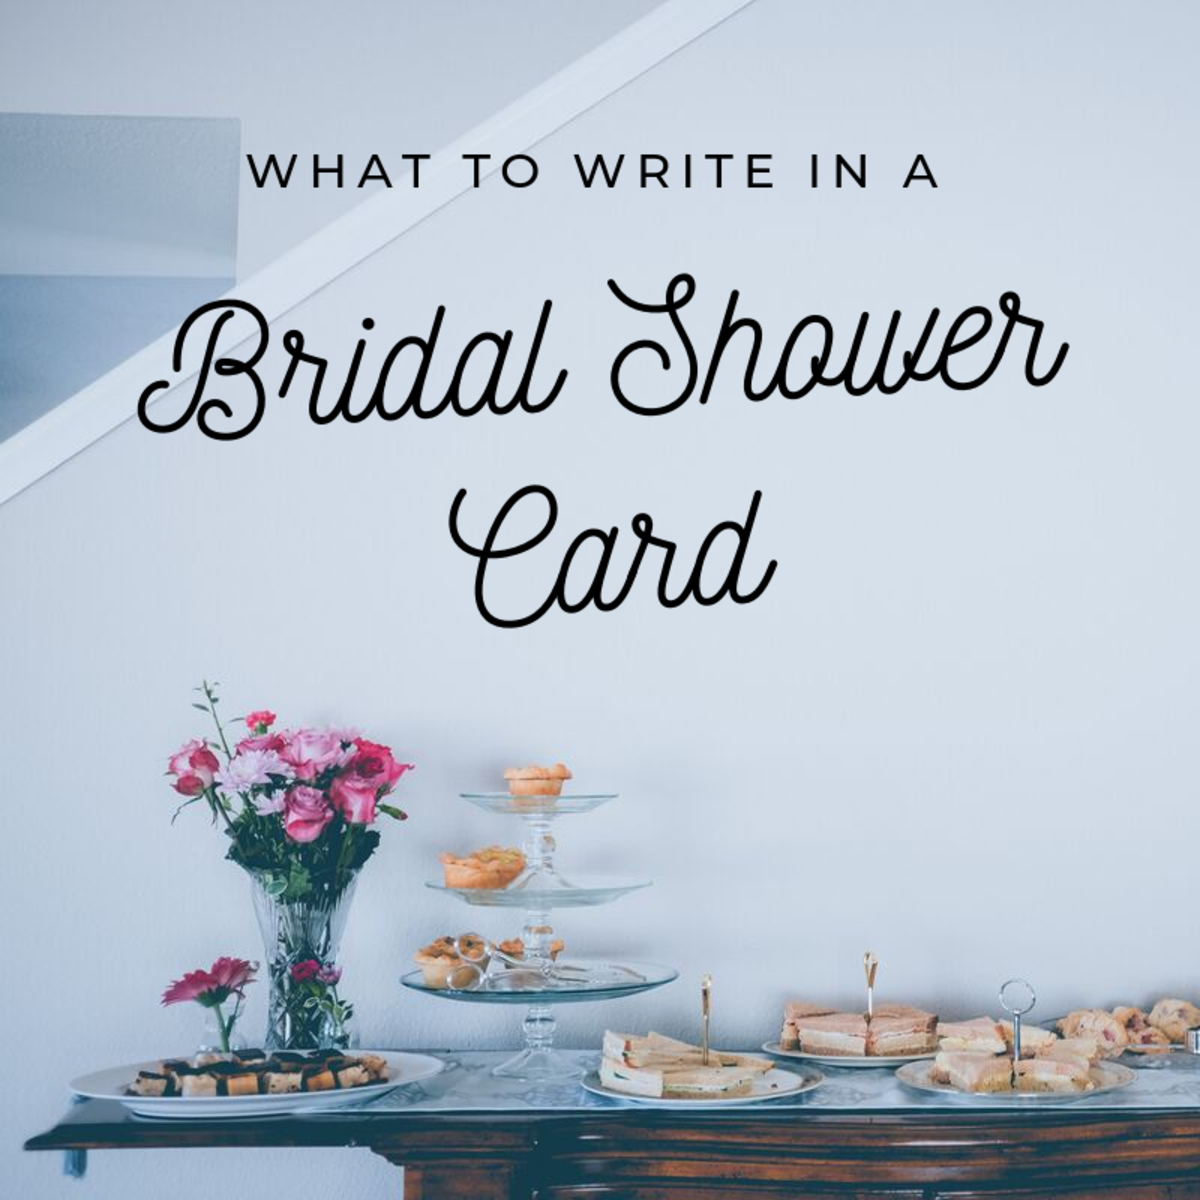 bridal-shower-card-messages-what-to-write-zola-expert-wedding-advice